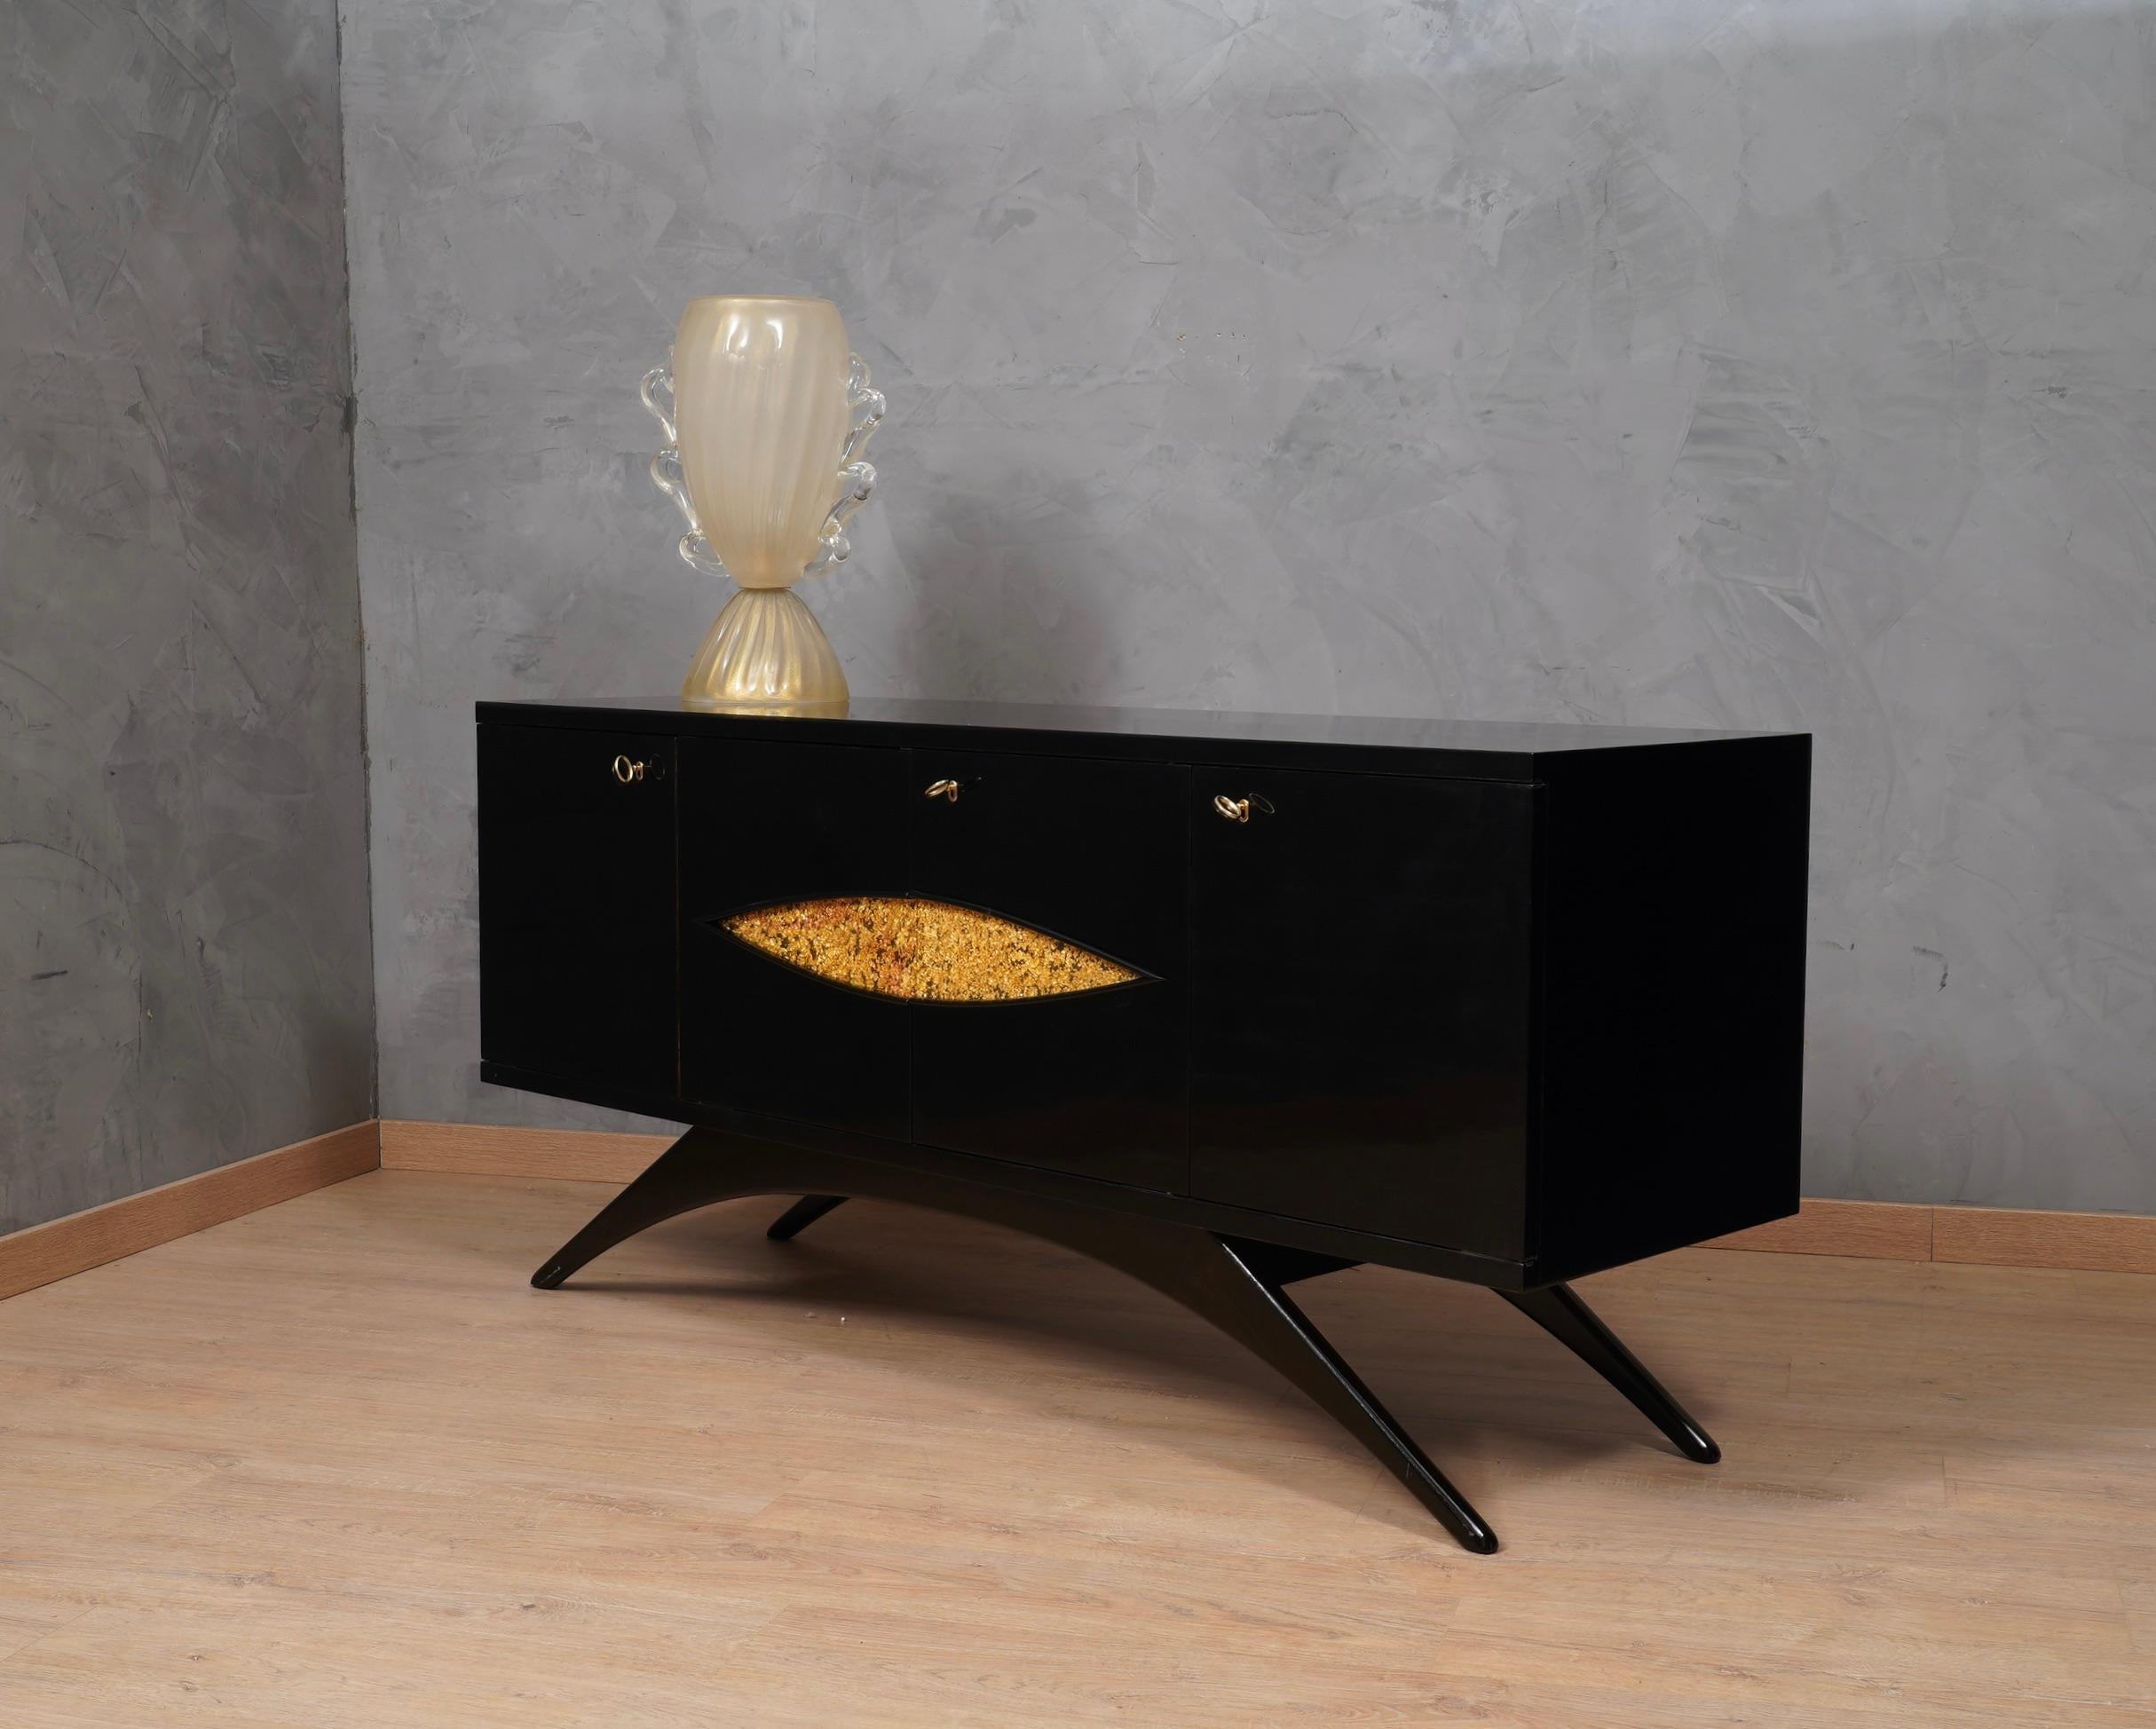 Wonderful Italian sideboards of the midcentury, precious in its processing. This sideboards has a very luxurious appearance, due the use of not common materials and the design, in characteristic Italian style of Paolo Buffa, Vittorio Dassi and